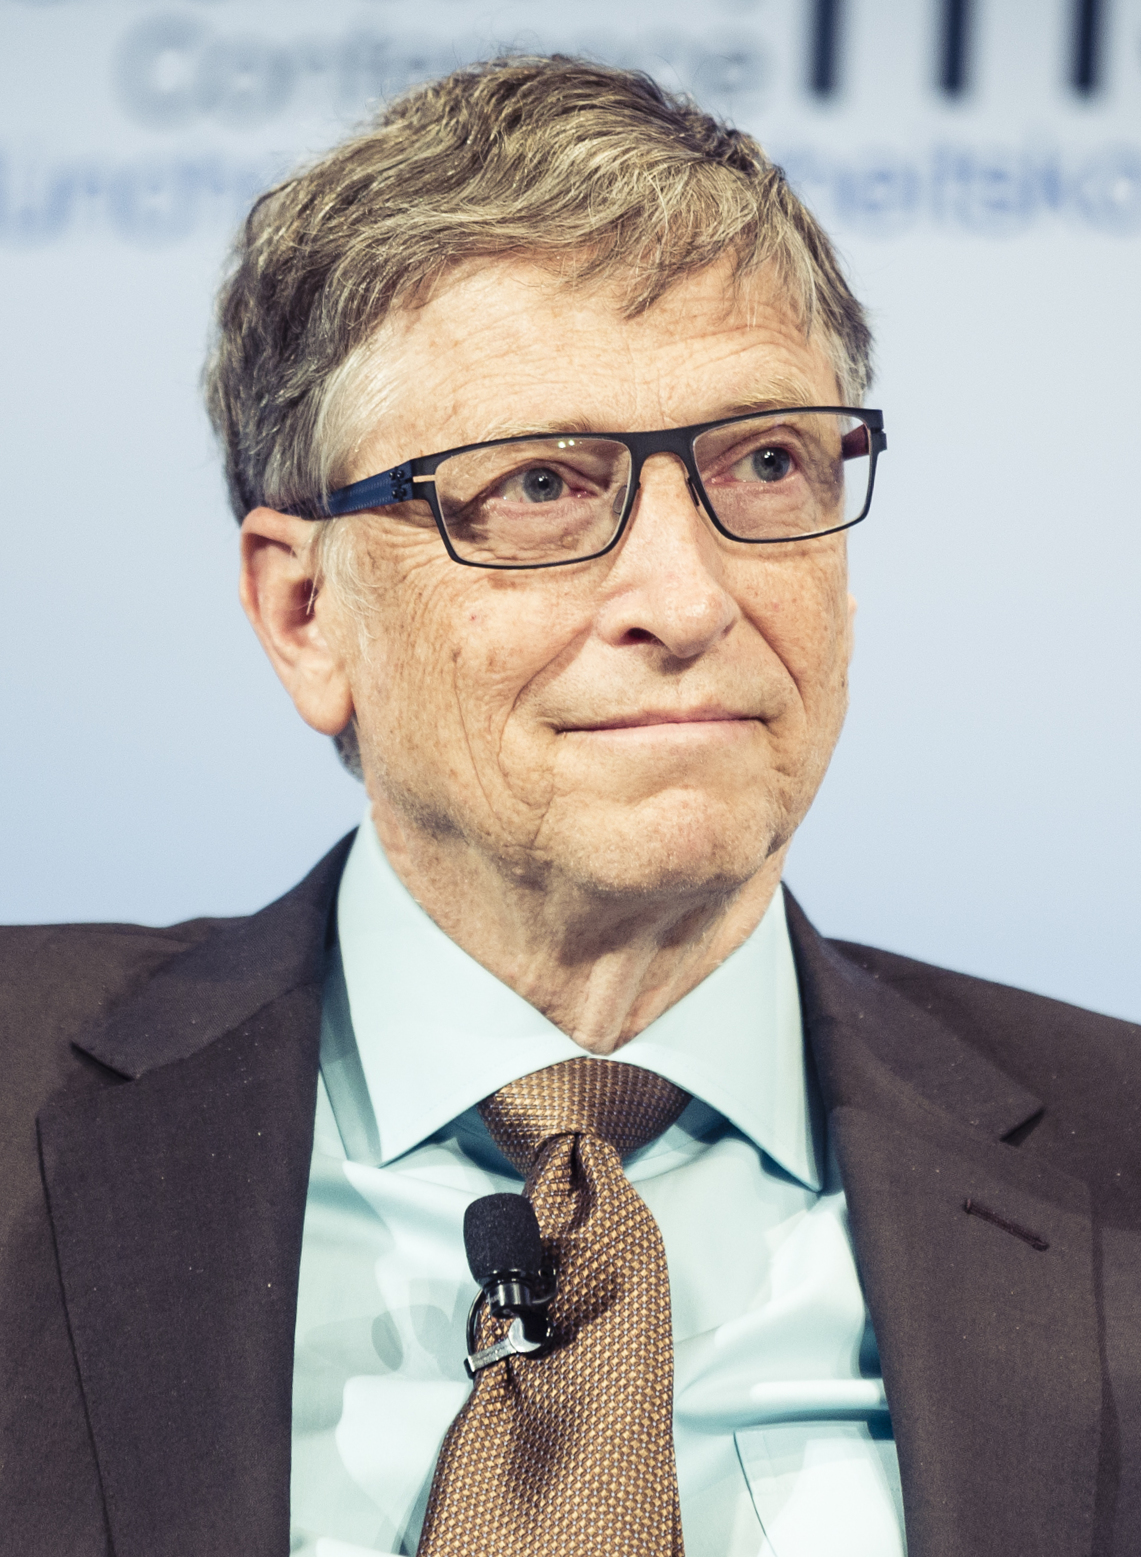 bill-gates-says-3-day-work-week-very-achievable-goal-in-view-of-ai